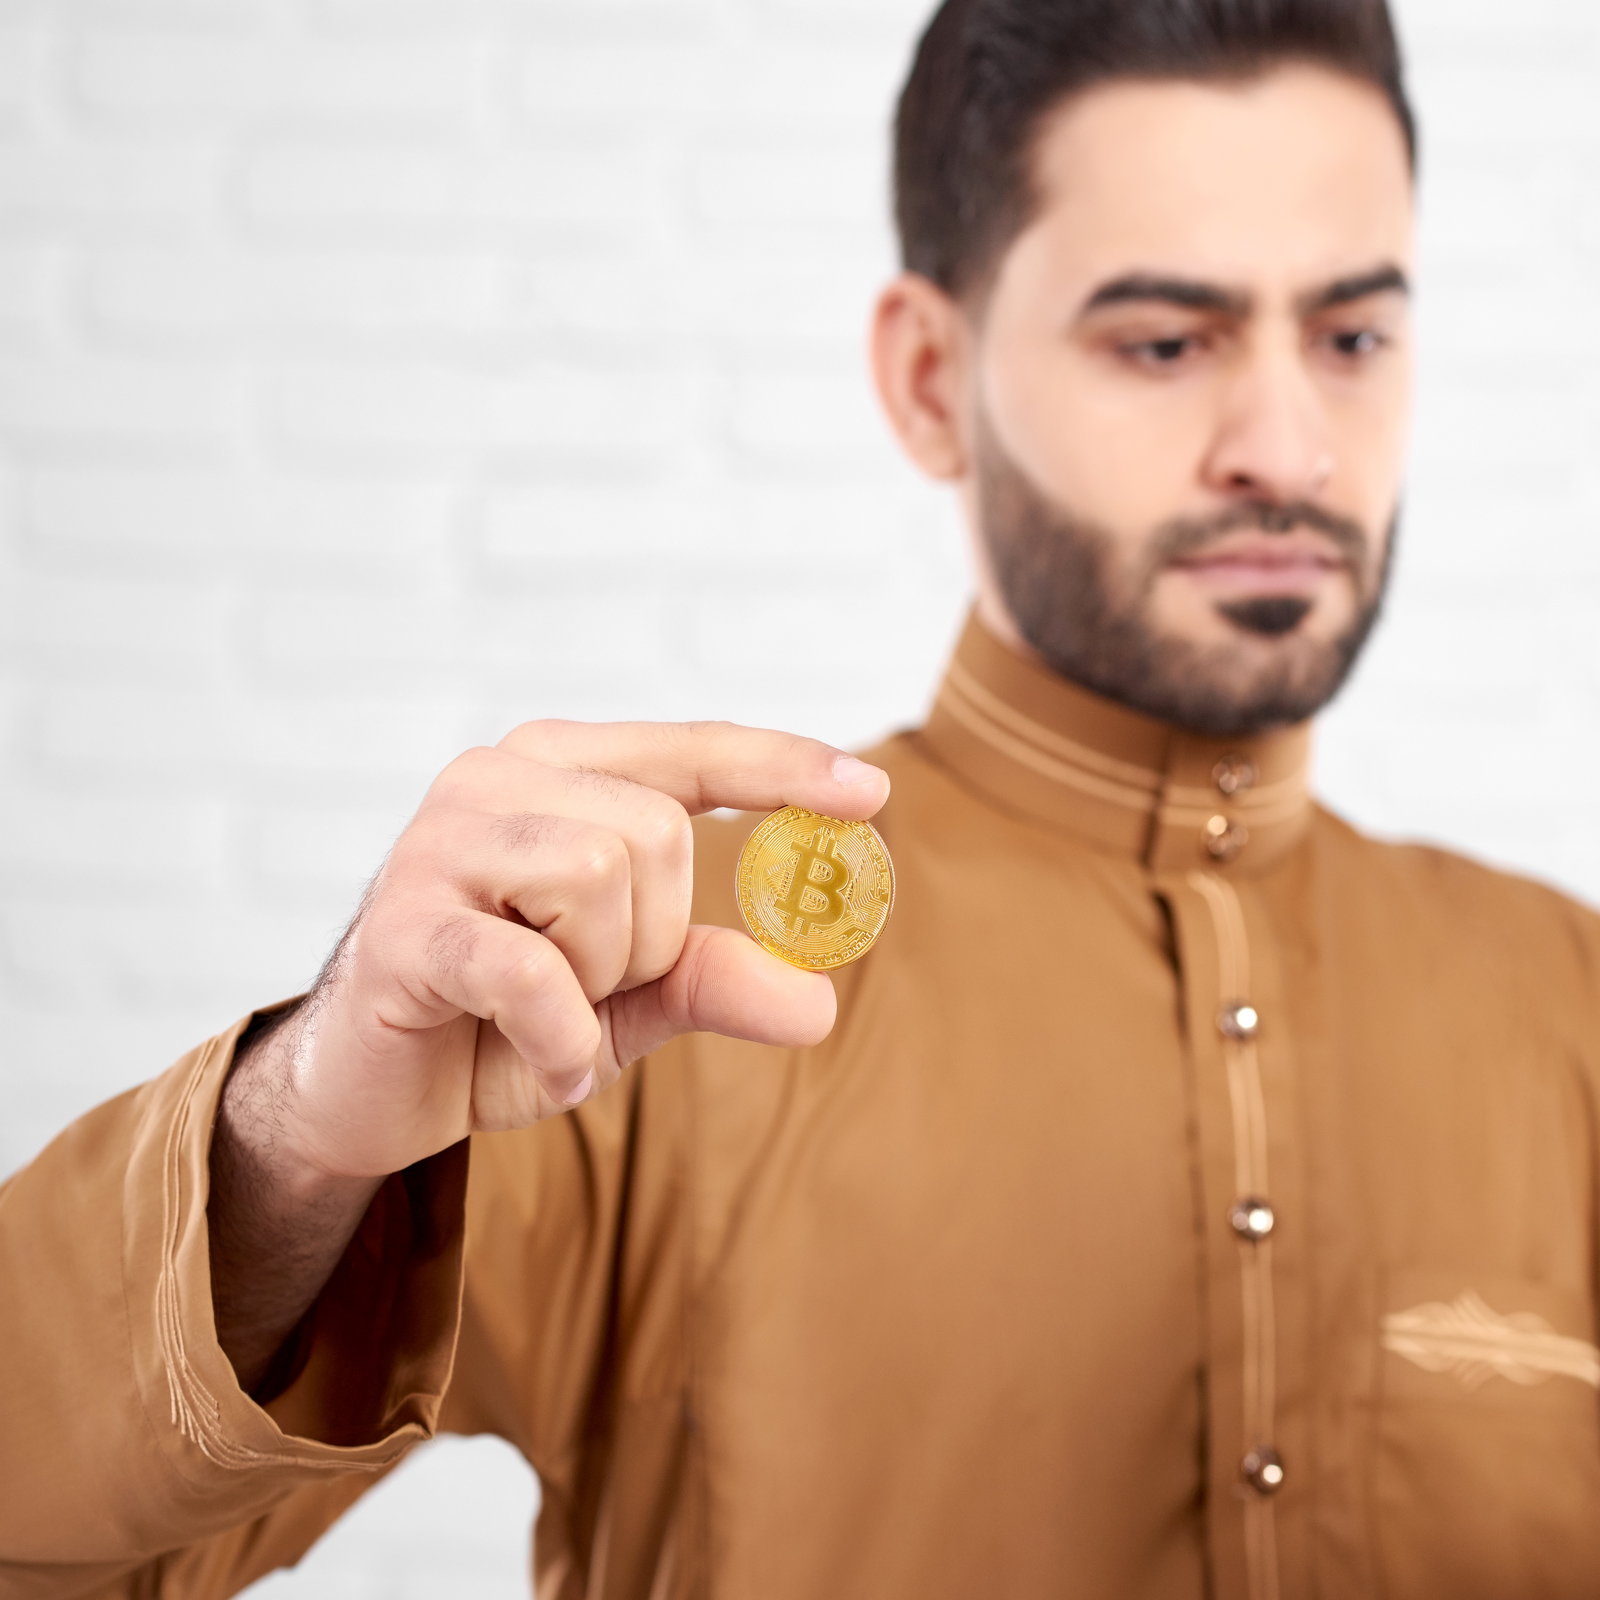 Xrp Halal Or Haram : Is Cryptocurrency Investing Halal Or Haram Quora / Sec accuses xrp investors of launching 'crusade' against the agency.